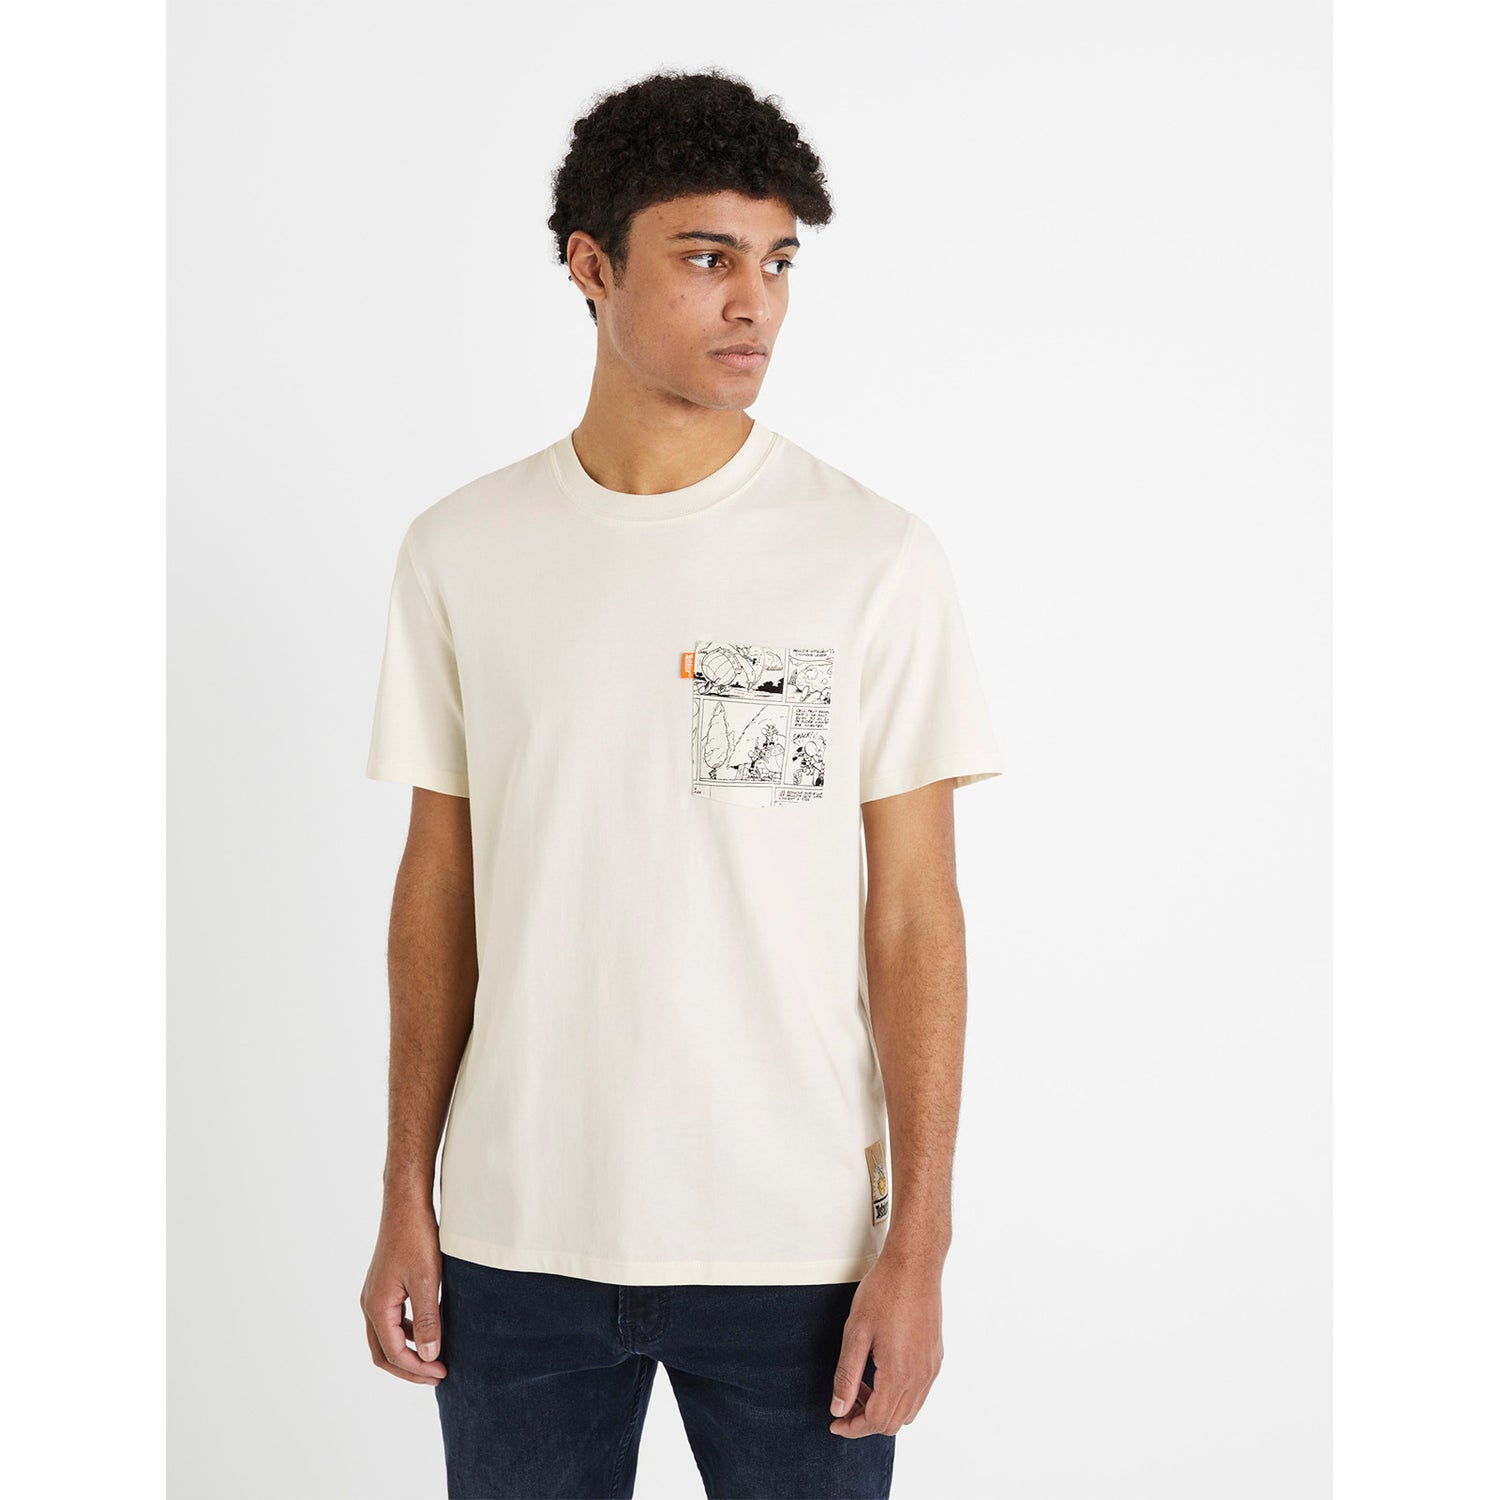 Graphic Off White Short Sleeves Round Neck Tshirts (Various Sizes)